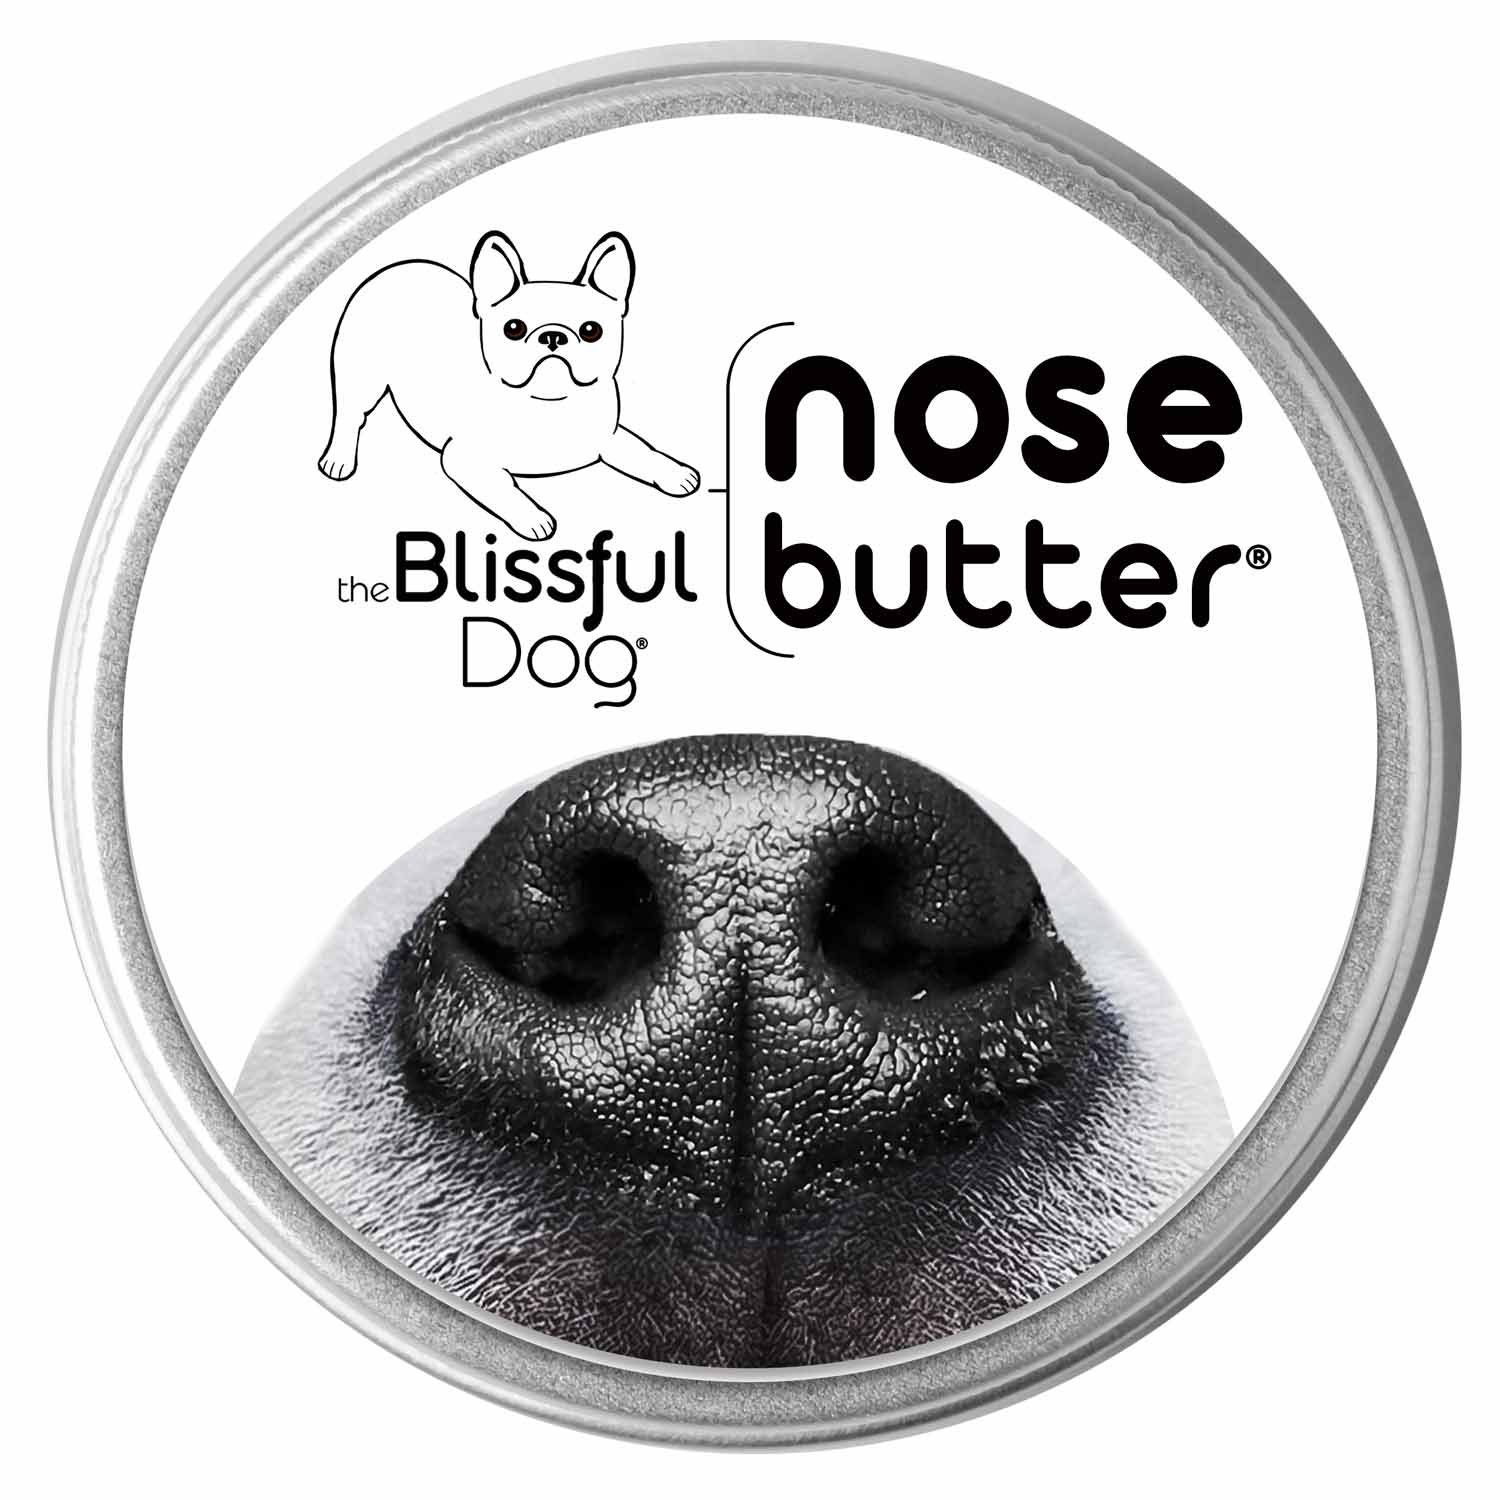 the blissful dog nose butter